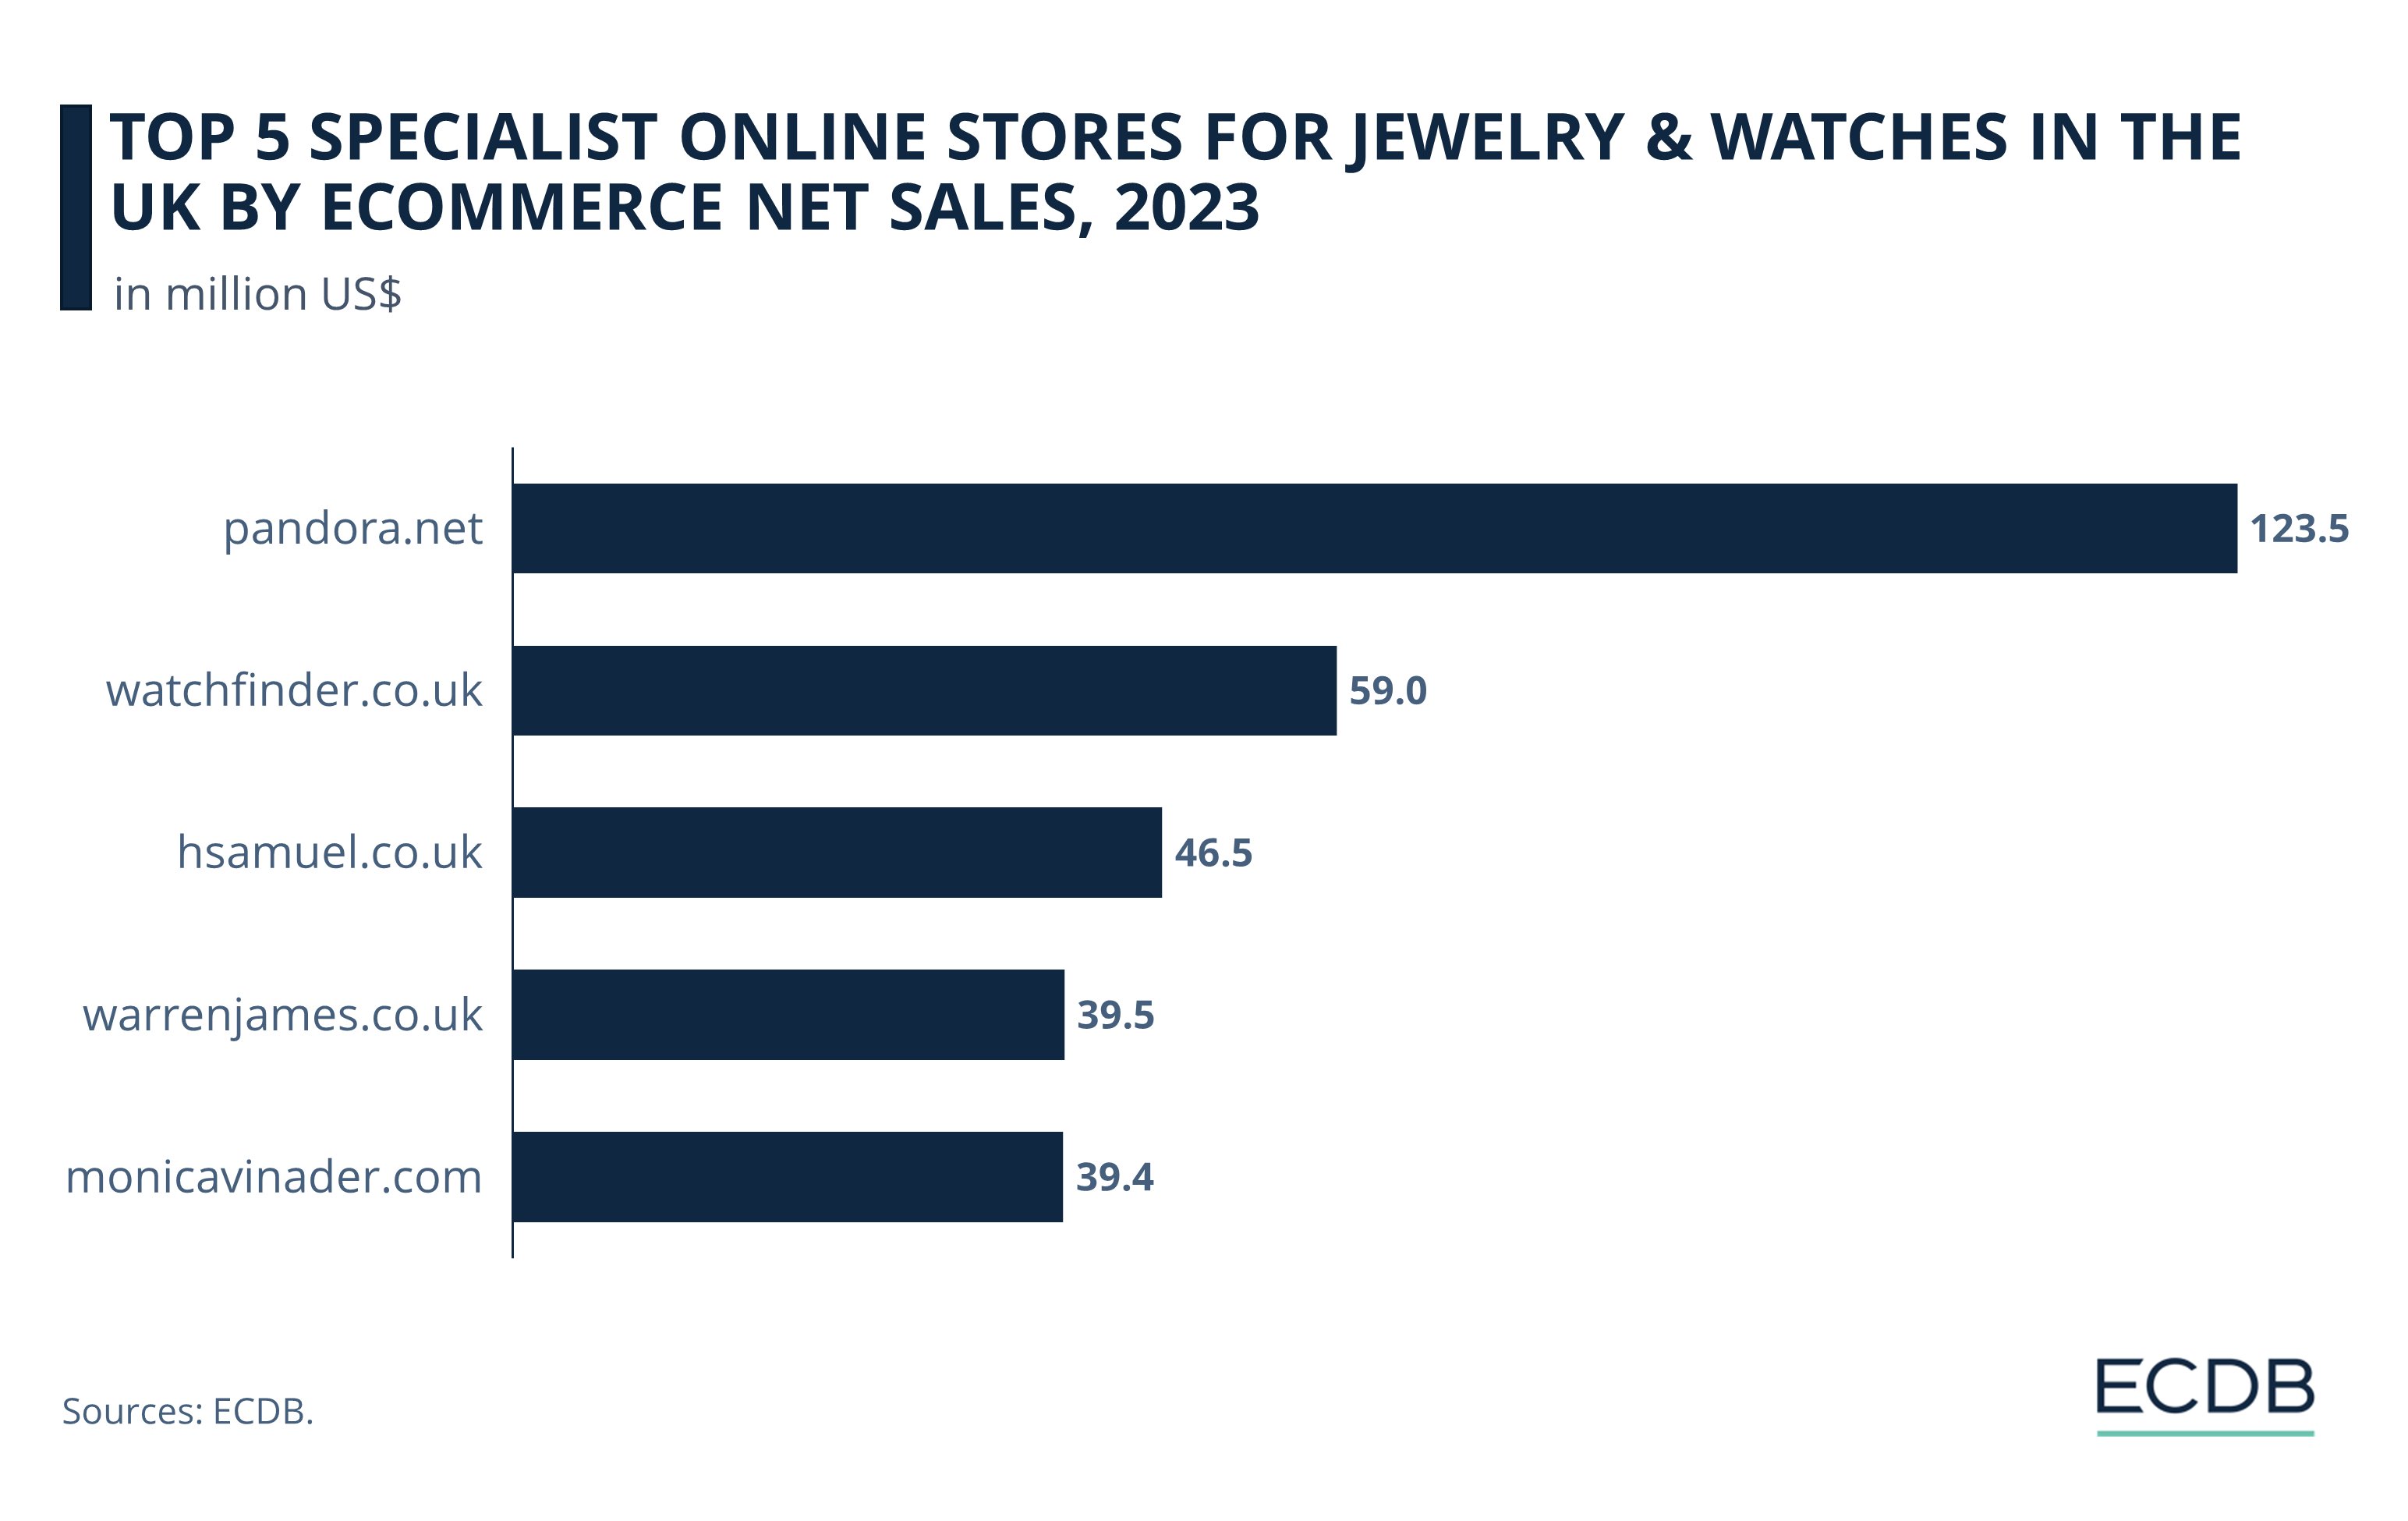 Top 5 Specialist Online Stores for Jewelry & Watches in the UK by eCommerce Net Sales, 2023